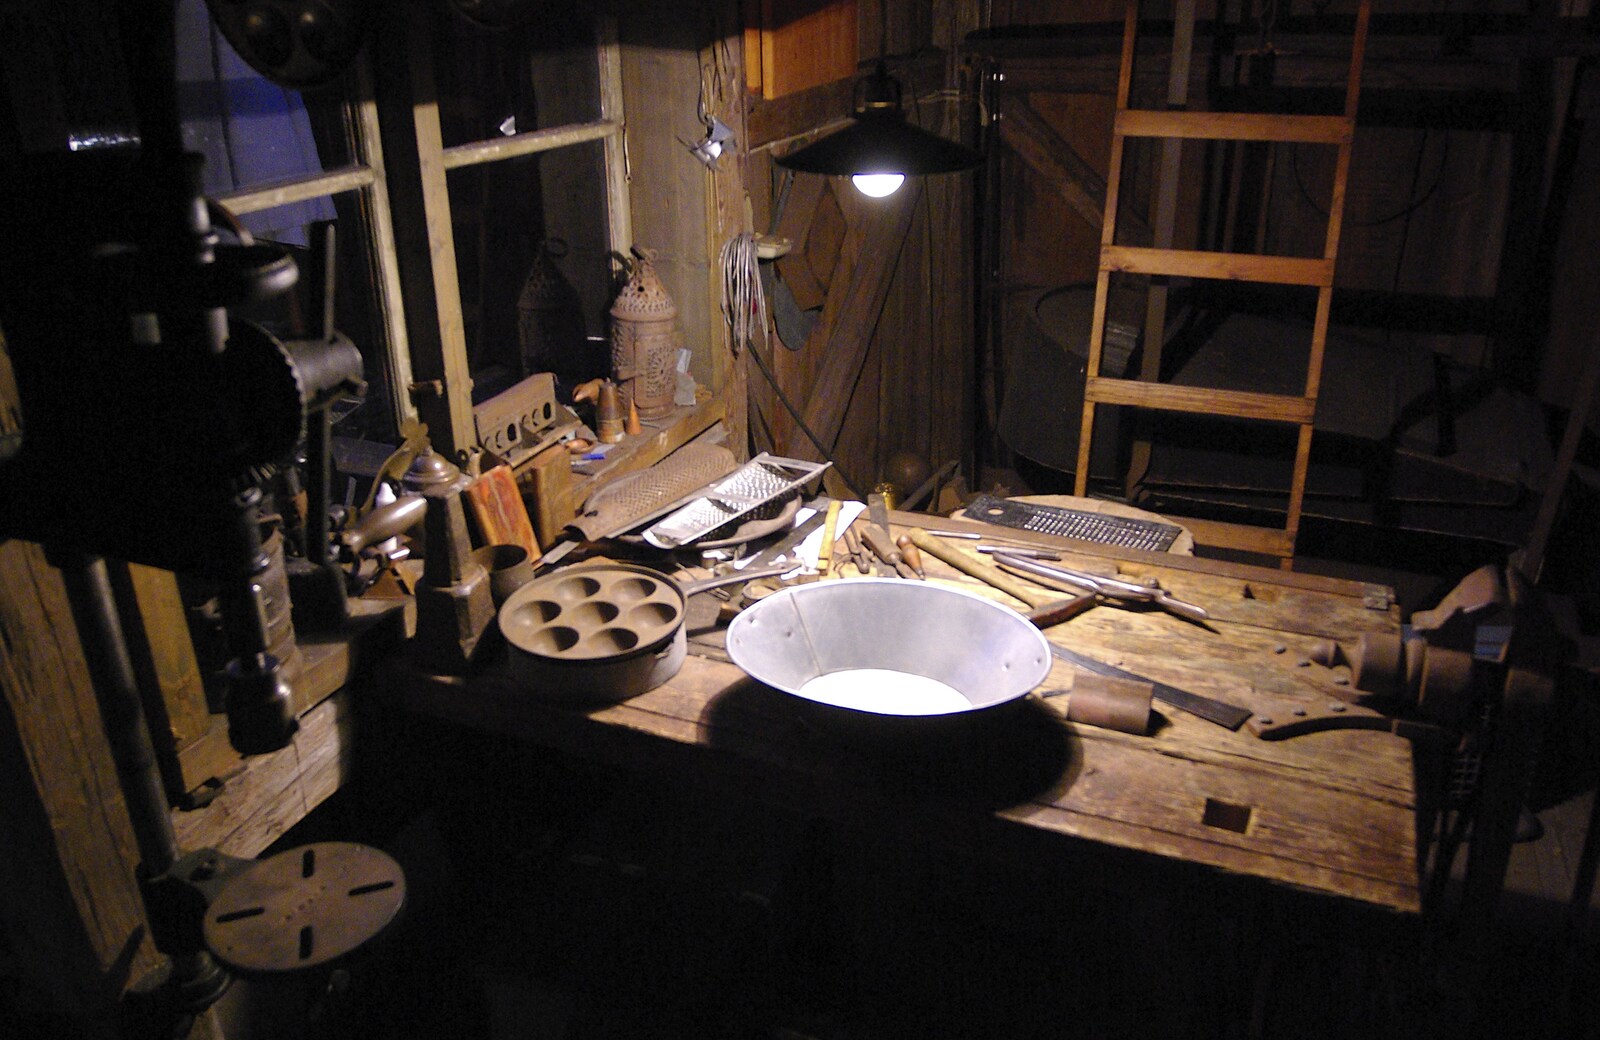 A metalworker's bench from A Few Hours in Skansen, Stockholm, Sweden - 17th December 2007